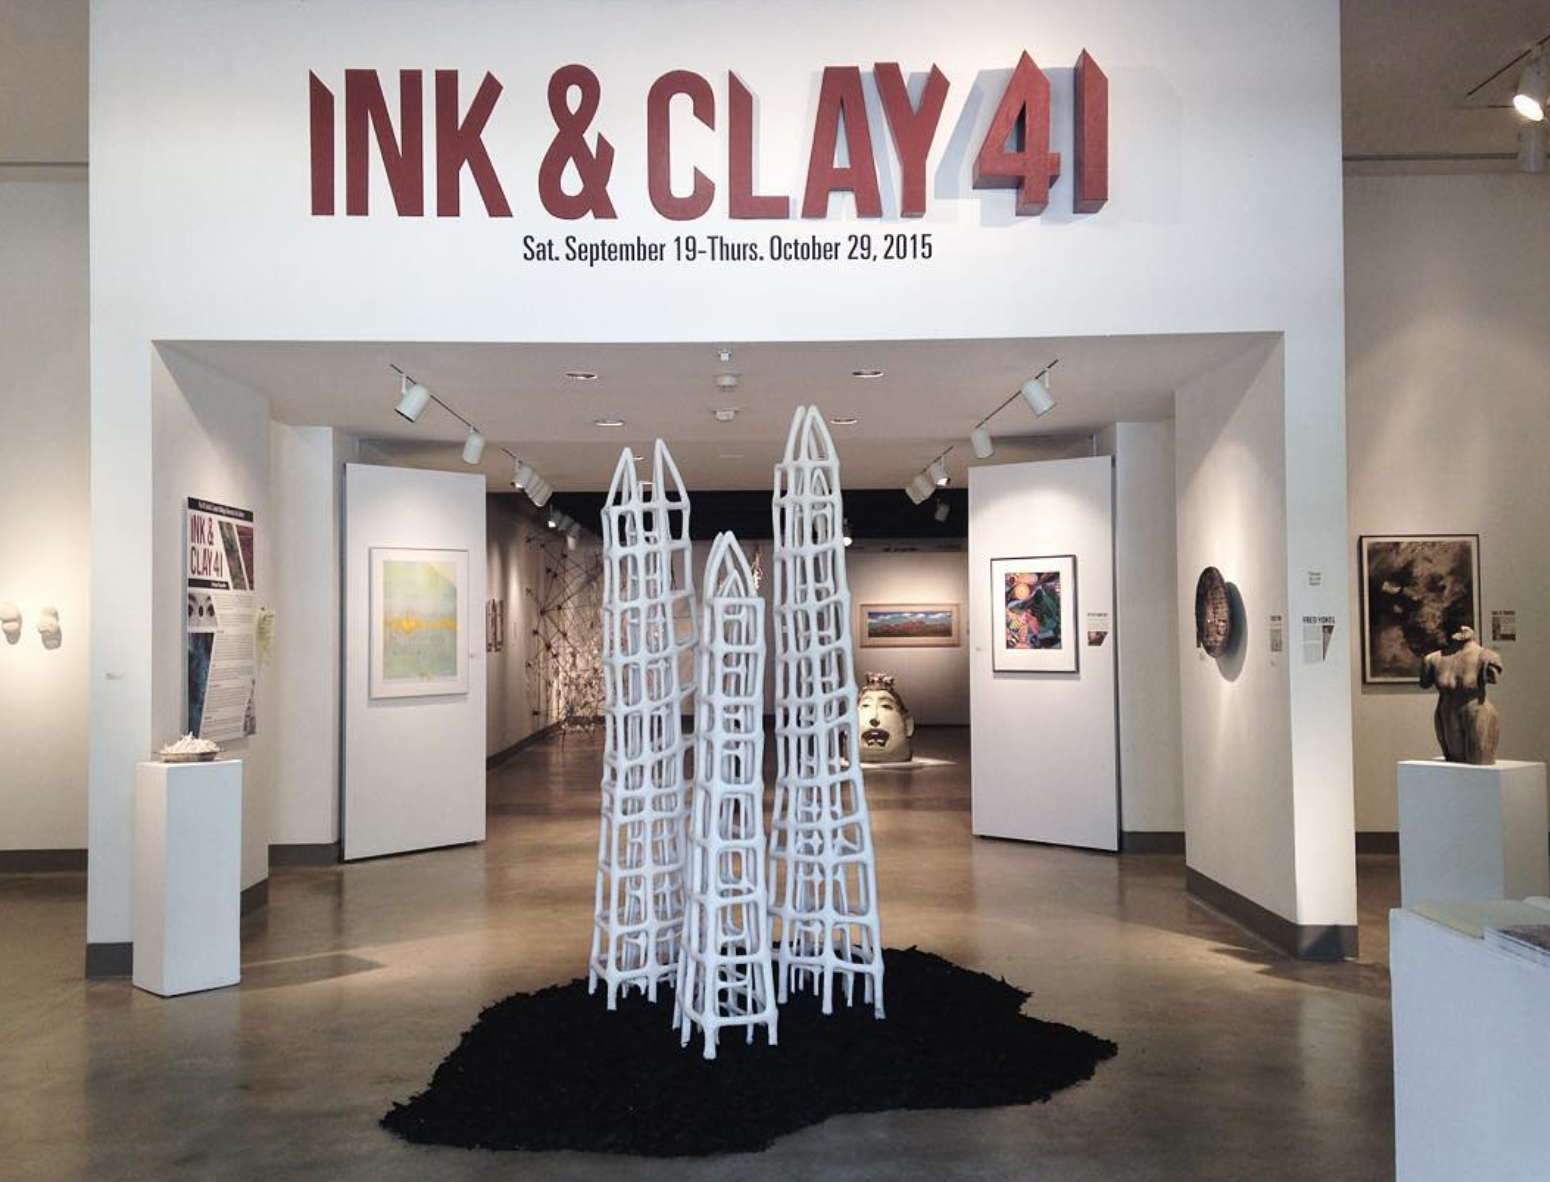 Installation View, Title Wall, Ink & Clay 41 Exhibition, Sept 19 - Oct 29, 2015